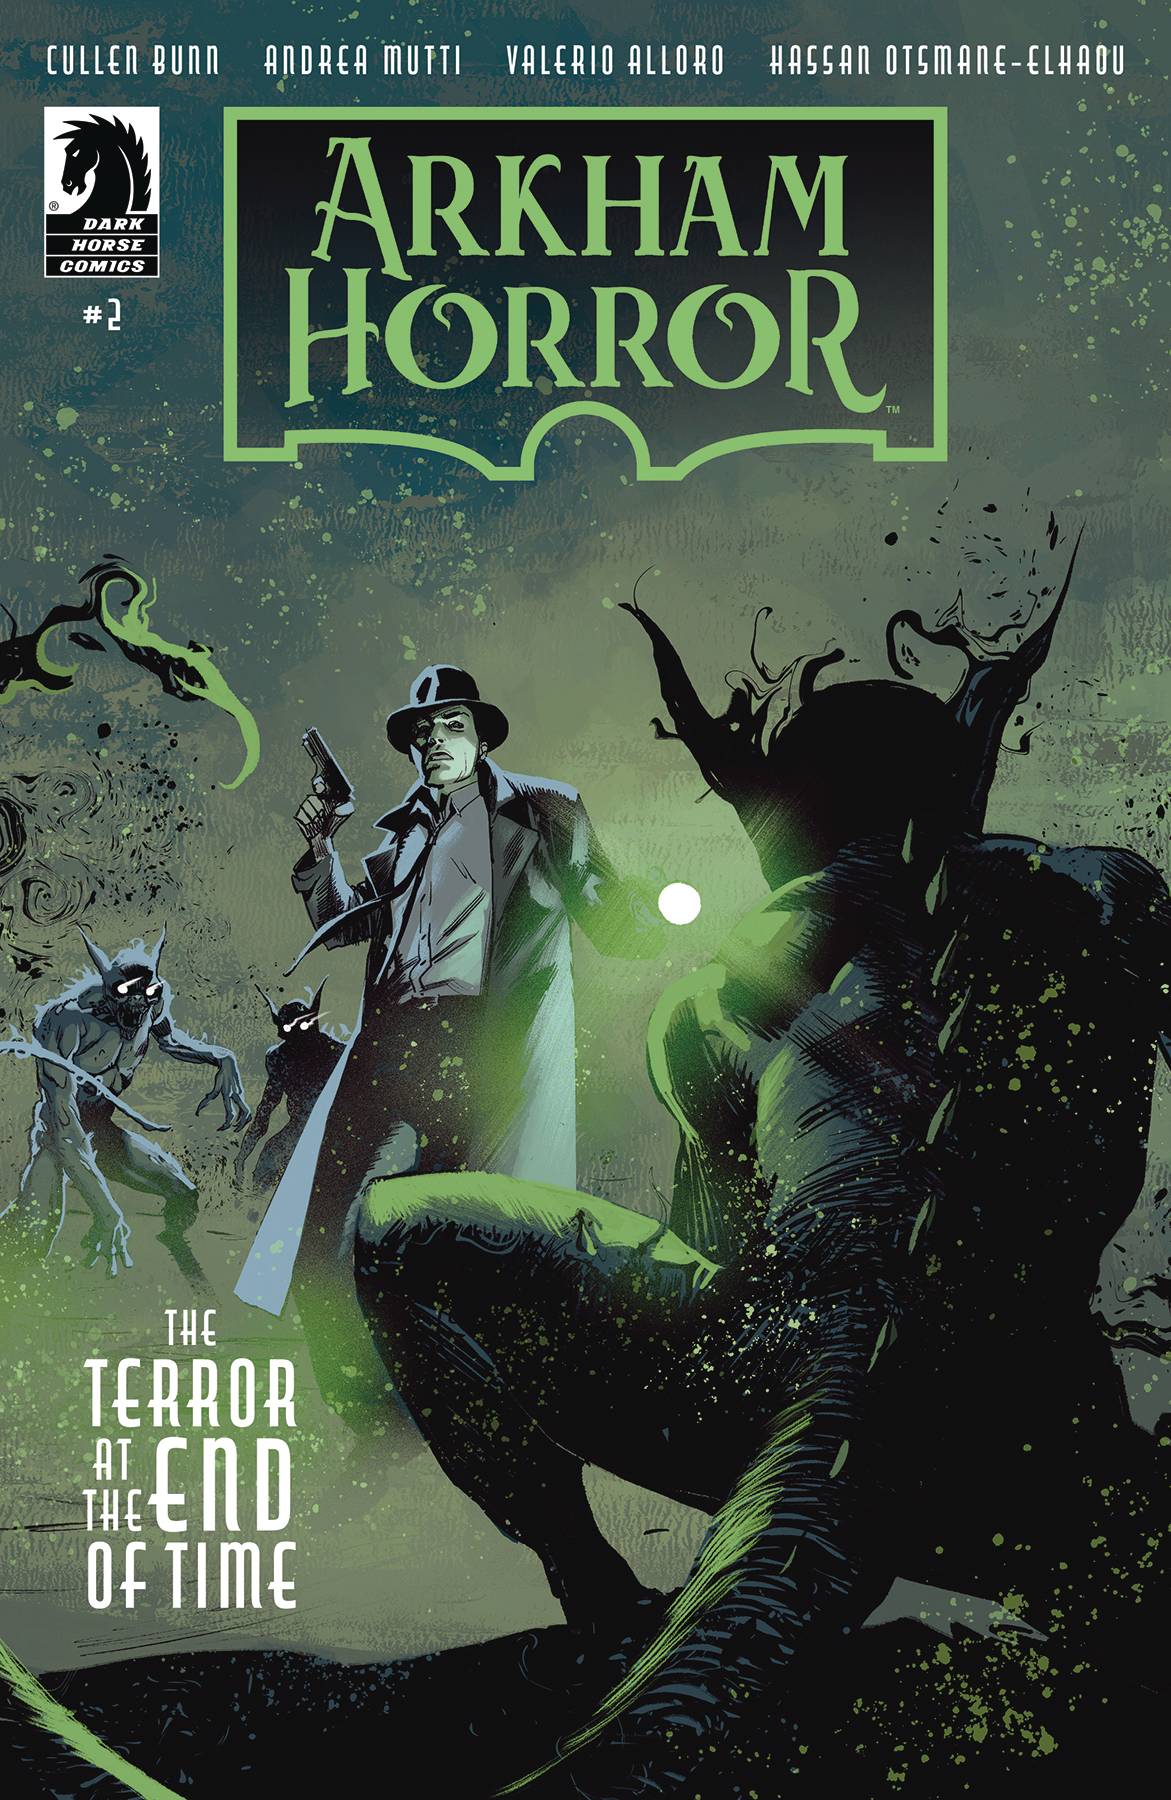 ARKHAM HORROR TERROR AT END OF TIME #2